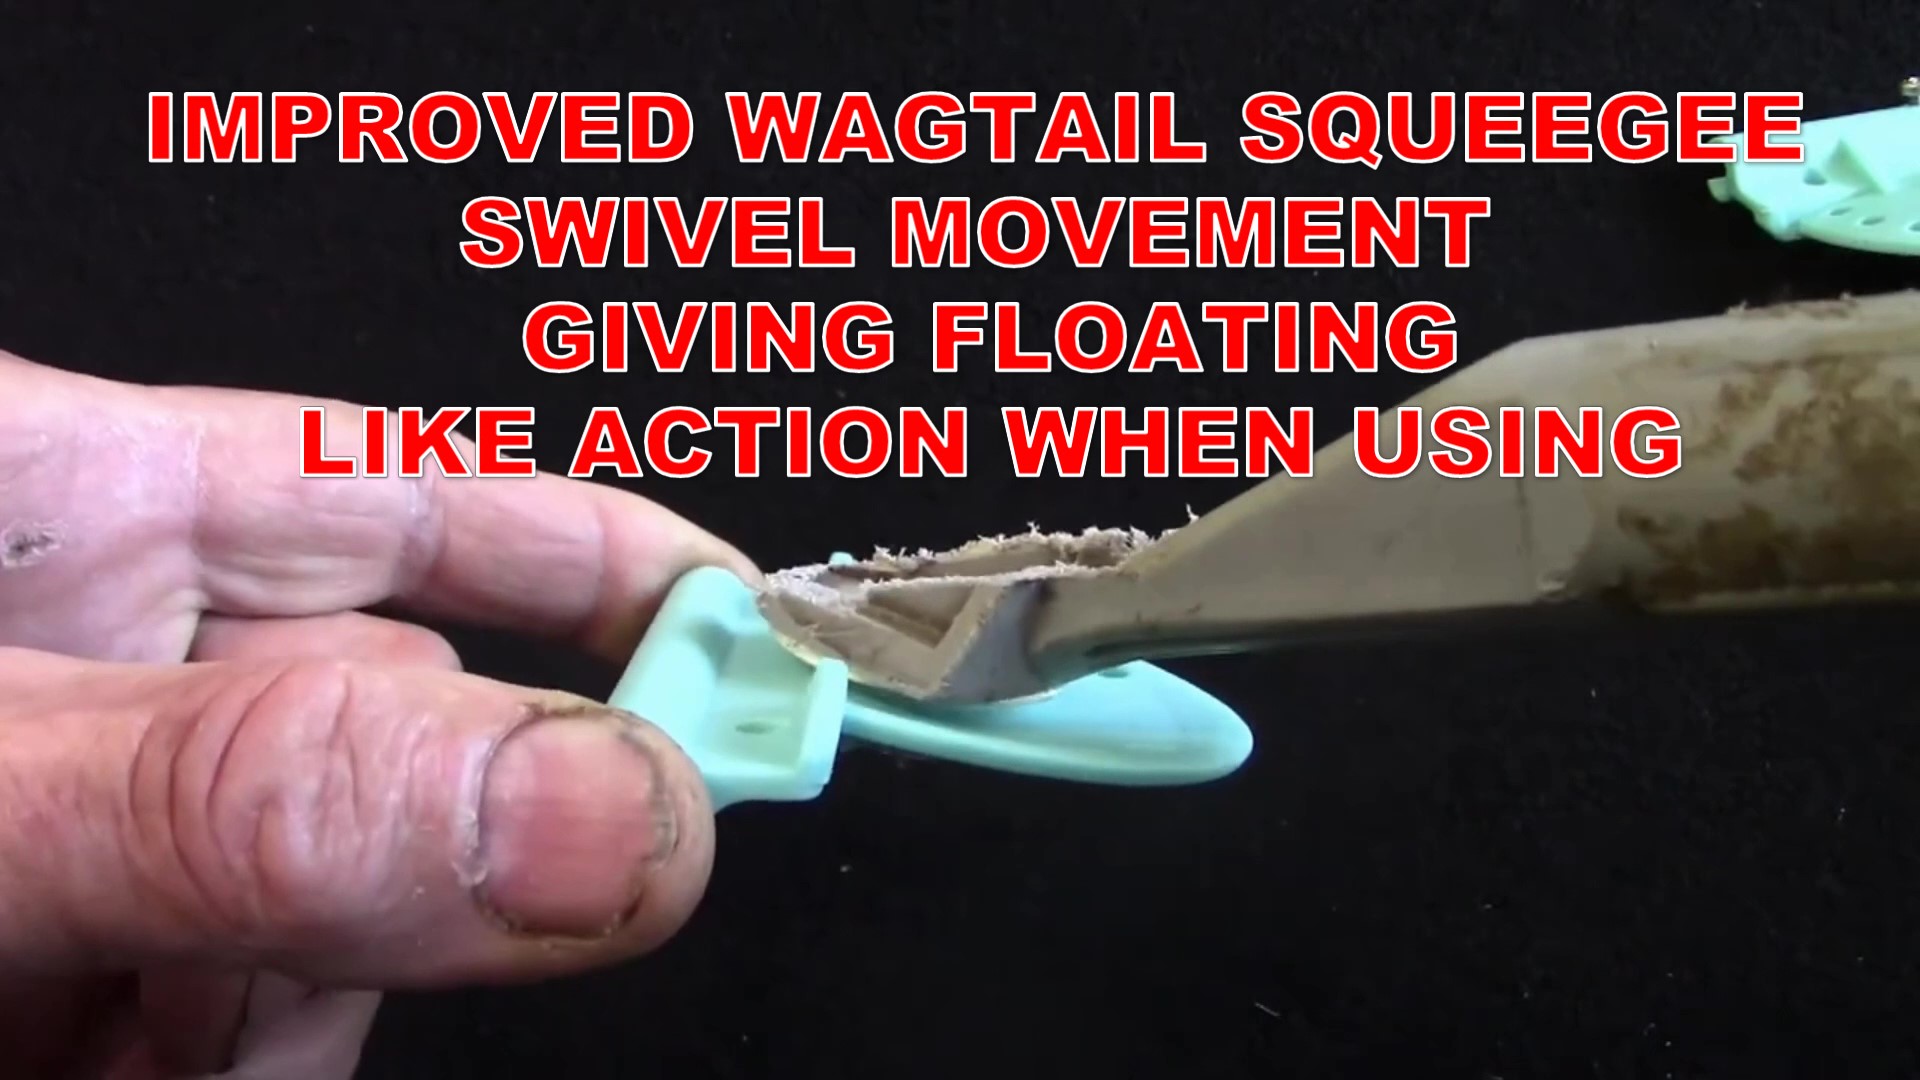 How we improved wagtail squeegee swivel movement using a pvc washer -  Residential - Window Cleaning Resource